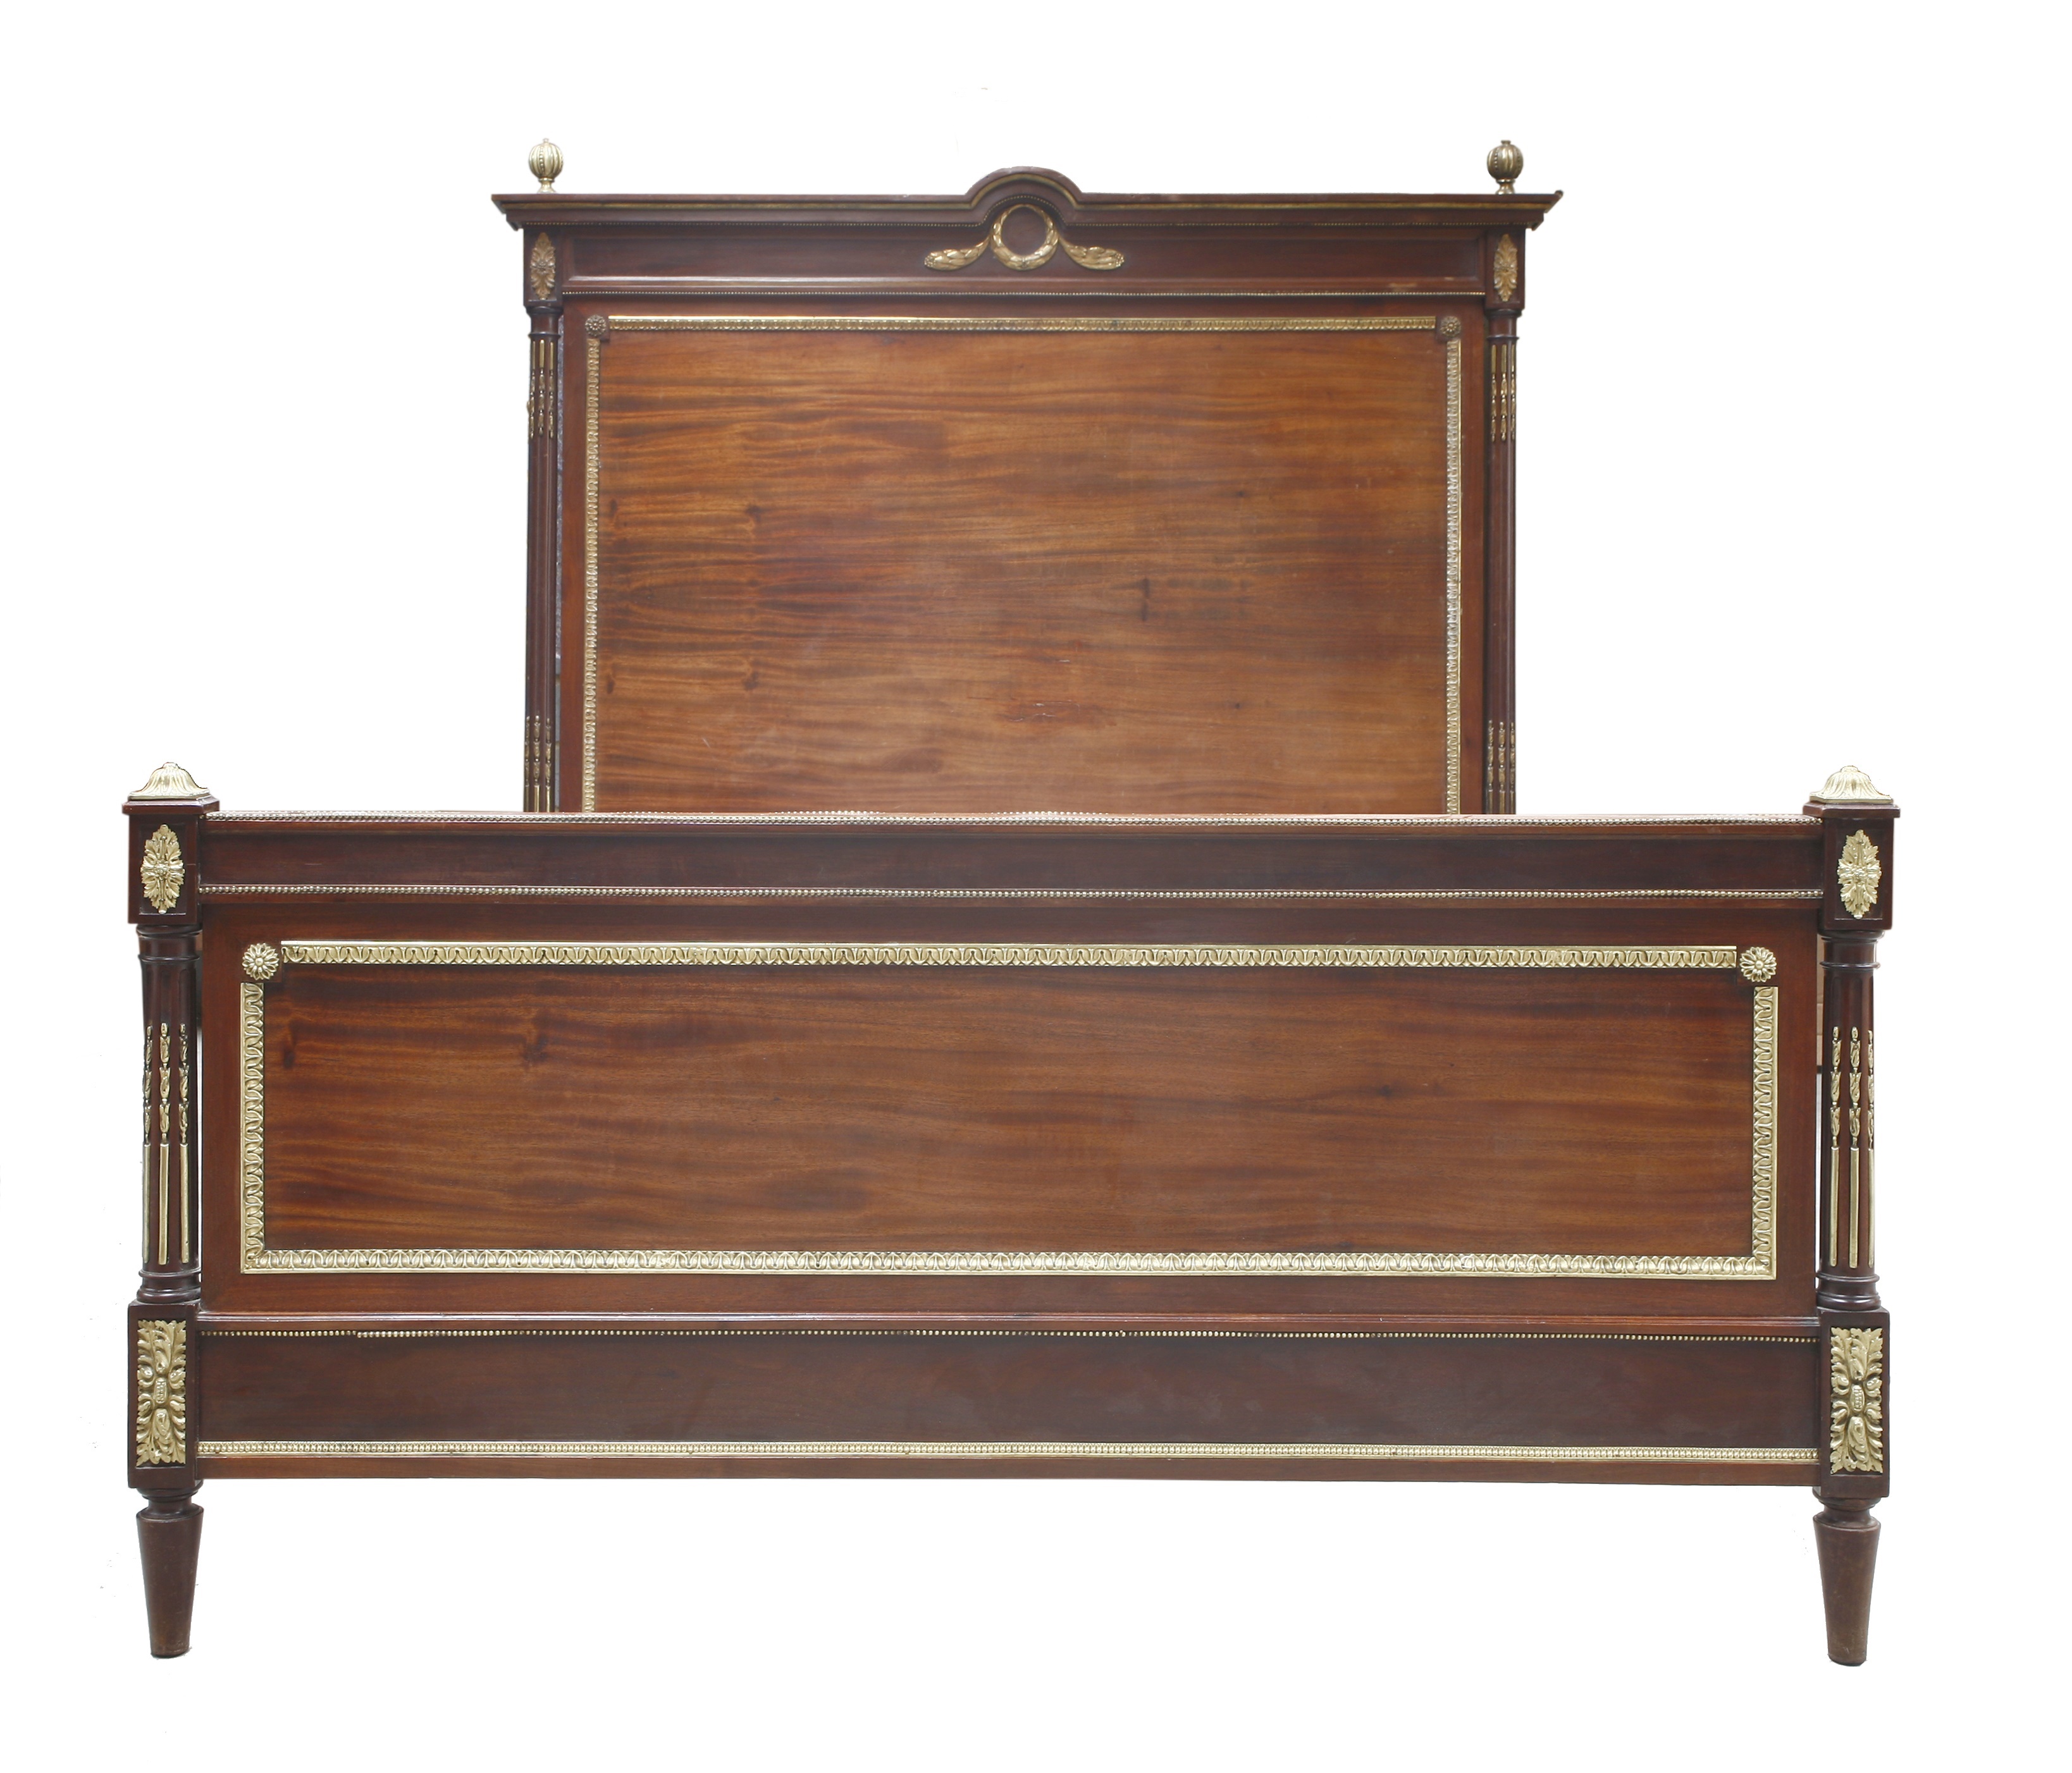 A French mahogany and gilt-mounted double bed